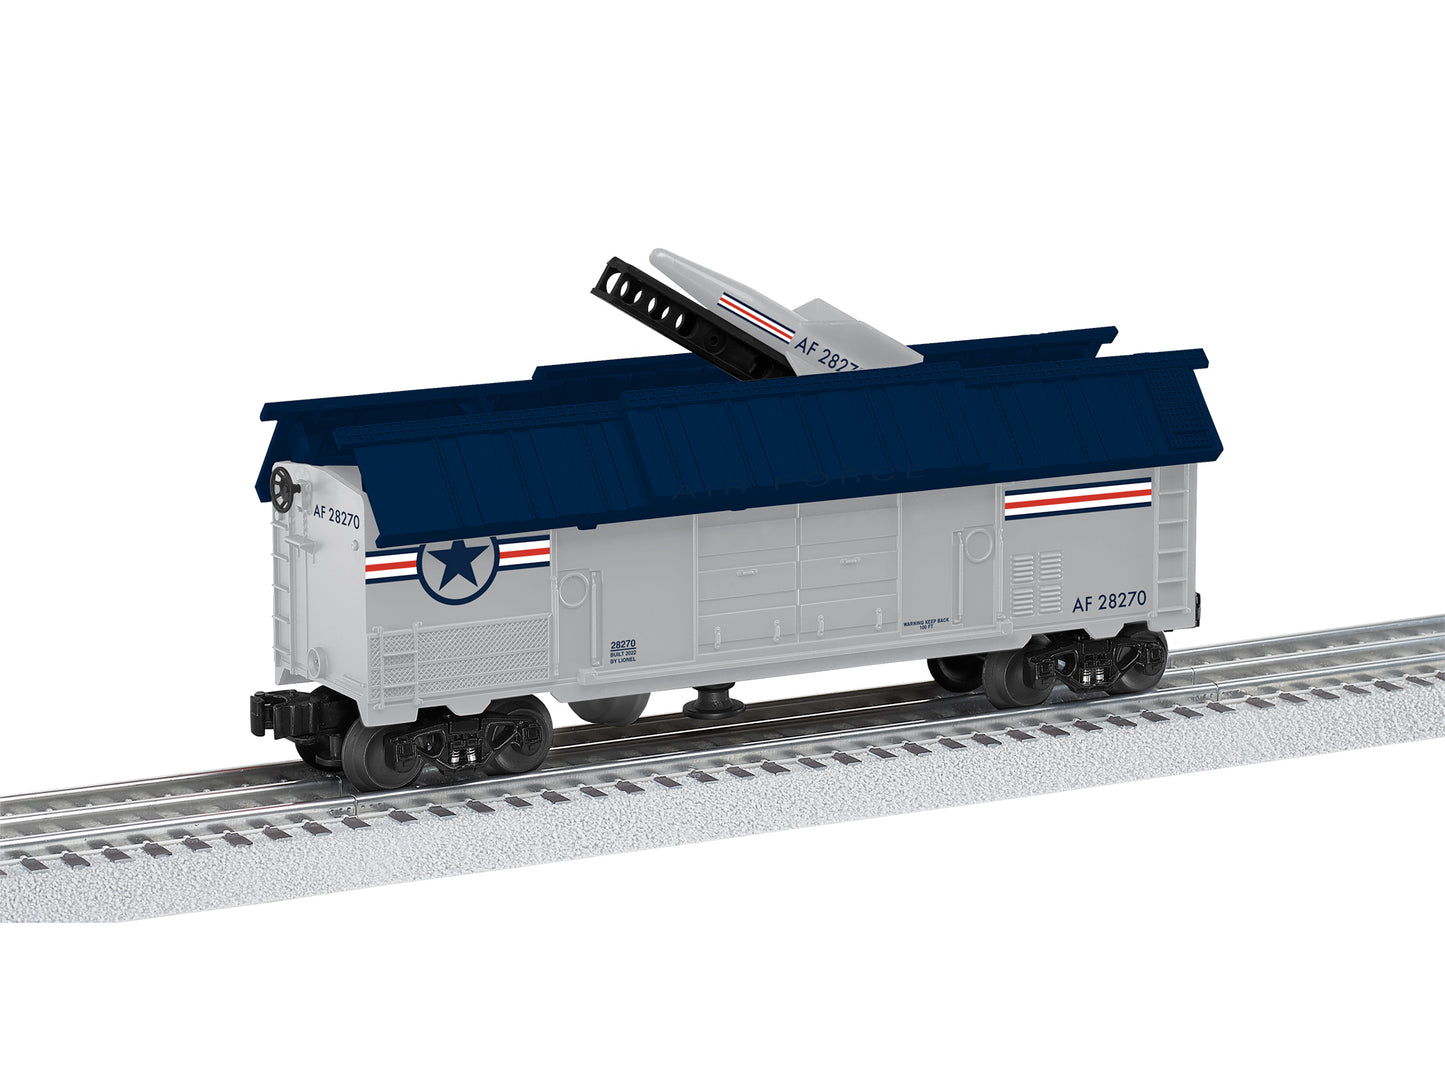 Model train set O scale Air Force Minutemen Car. Missile deployed